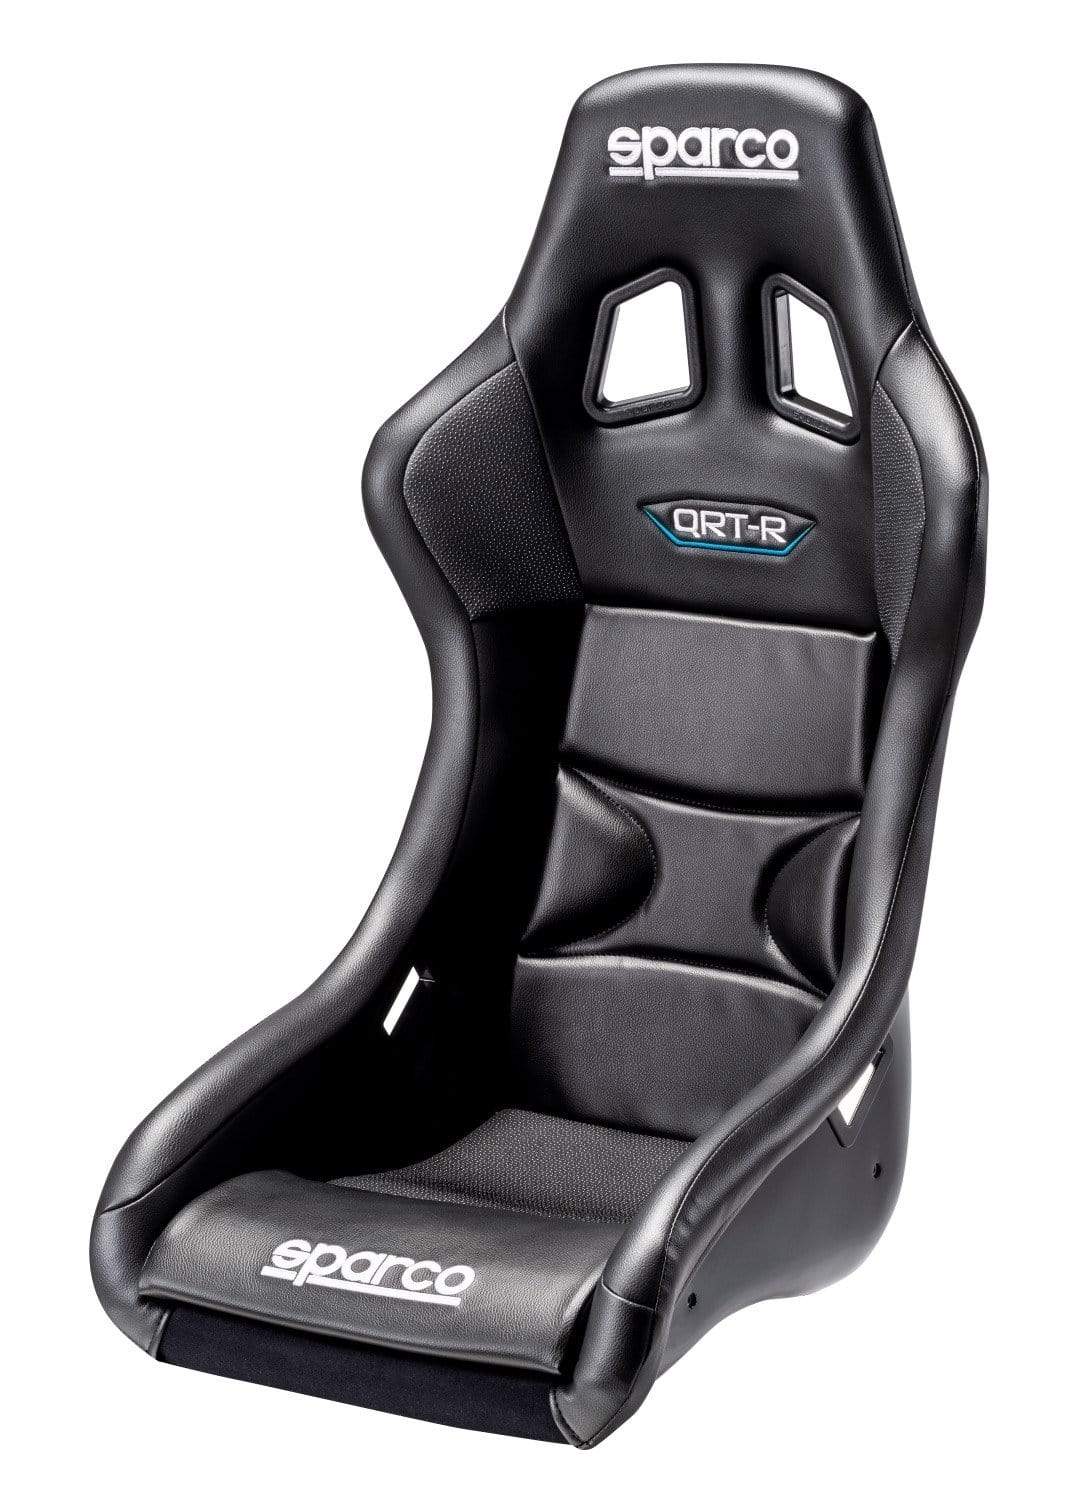 Sparco Seat QRT-R 2019 Vinyl Black - Universal - Dirty Racing Products